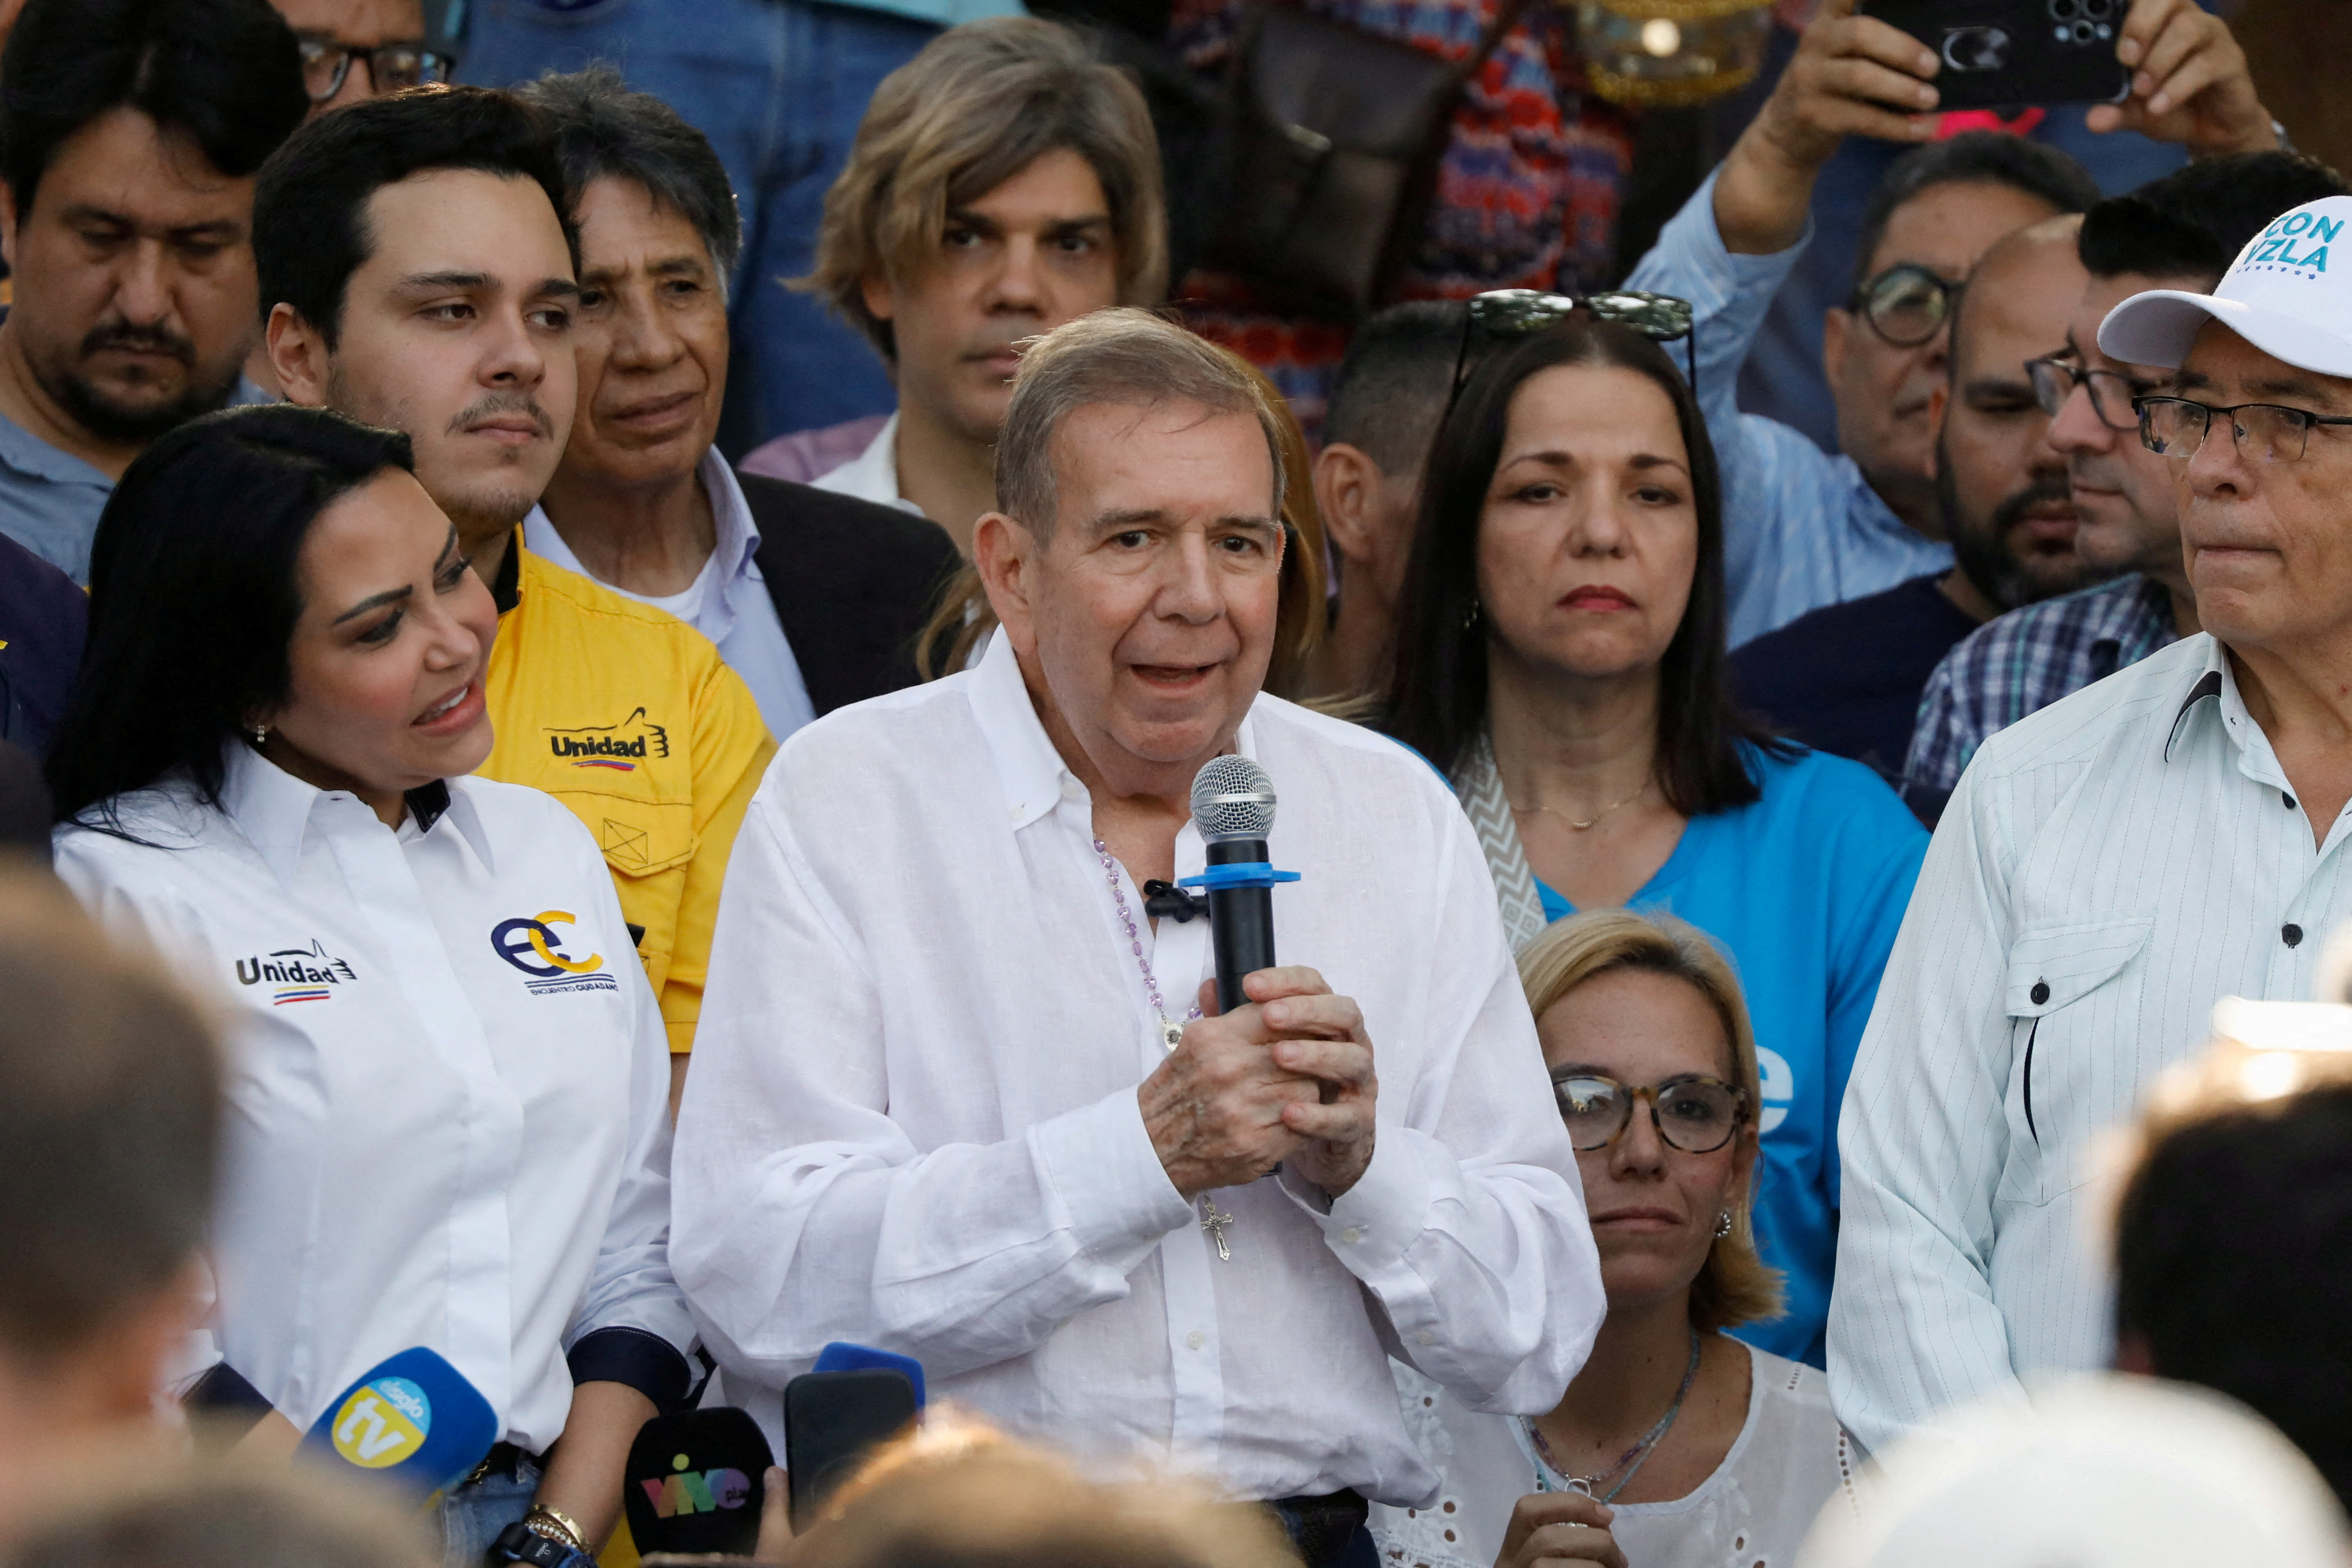 Venezuelan opposition presidential candidate Edmundo Gonzalez participates in rally with the members of the electoral table in Caracas